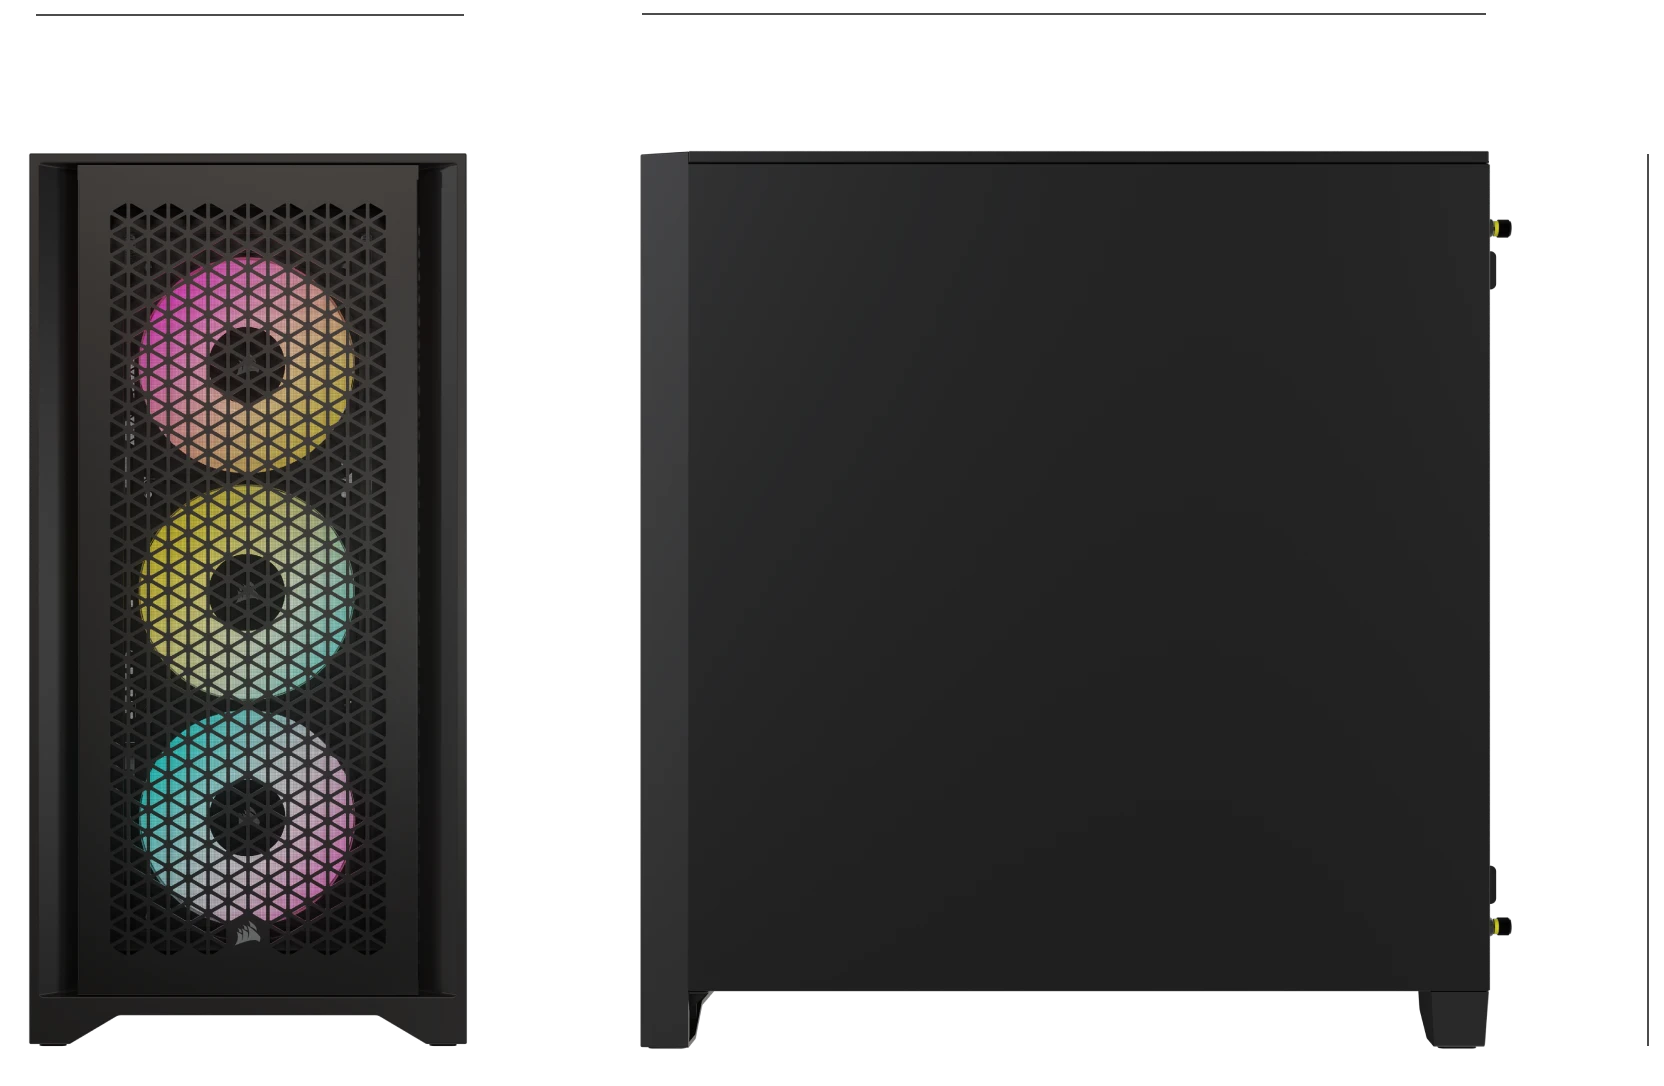 Head-on view of empty 4000D RGB AIRFLOW PC case showing fan capacity.